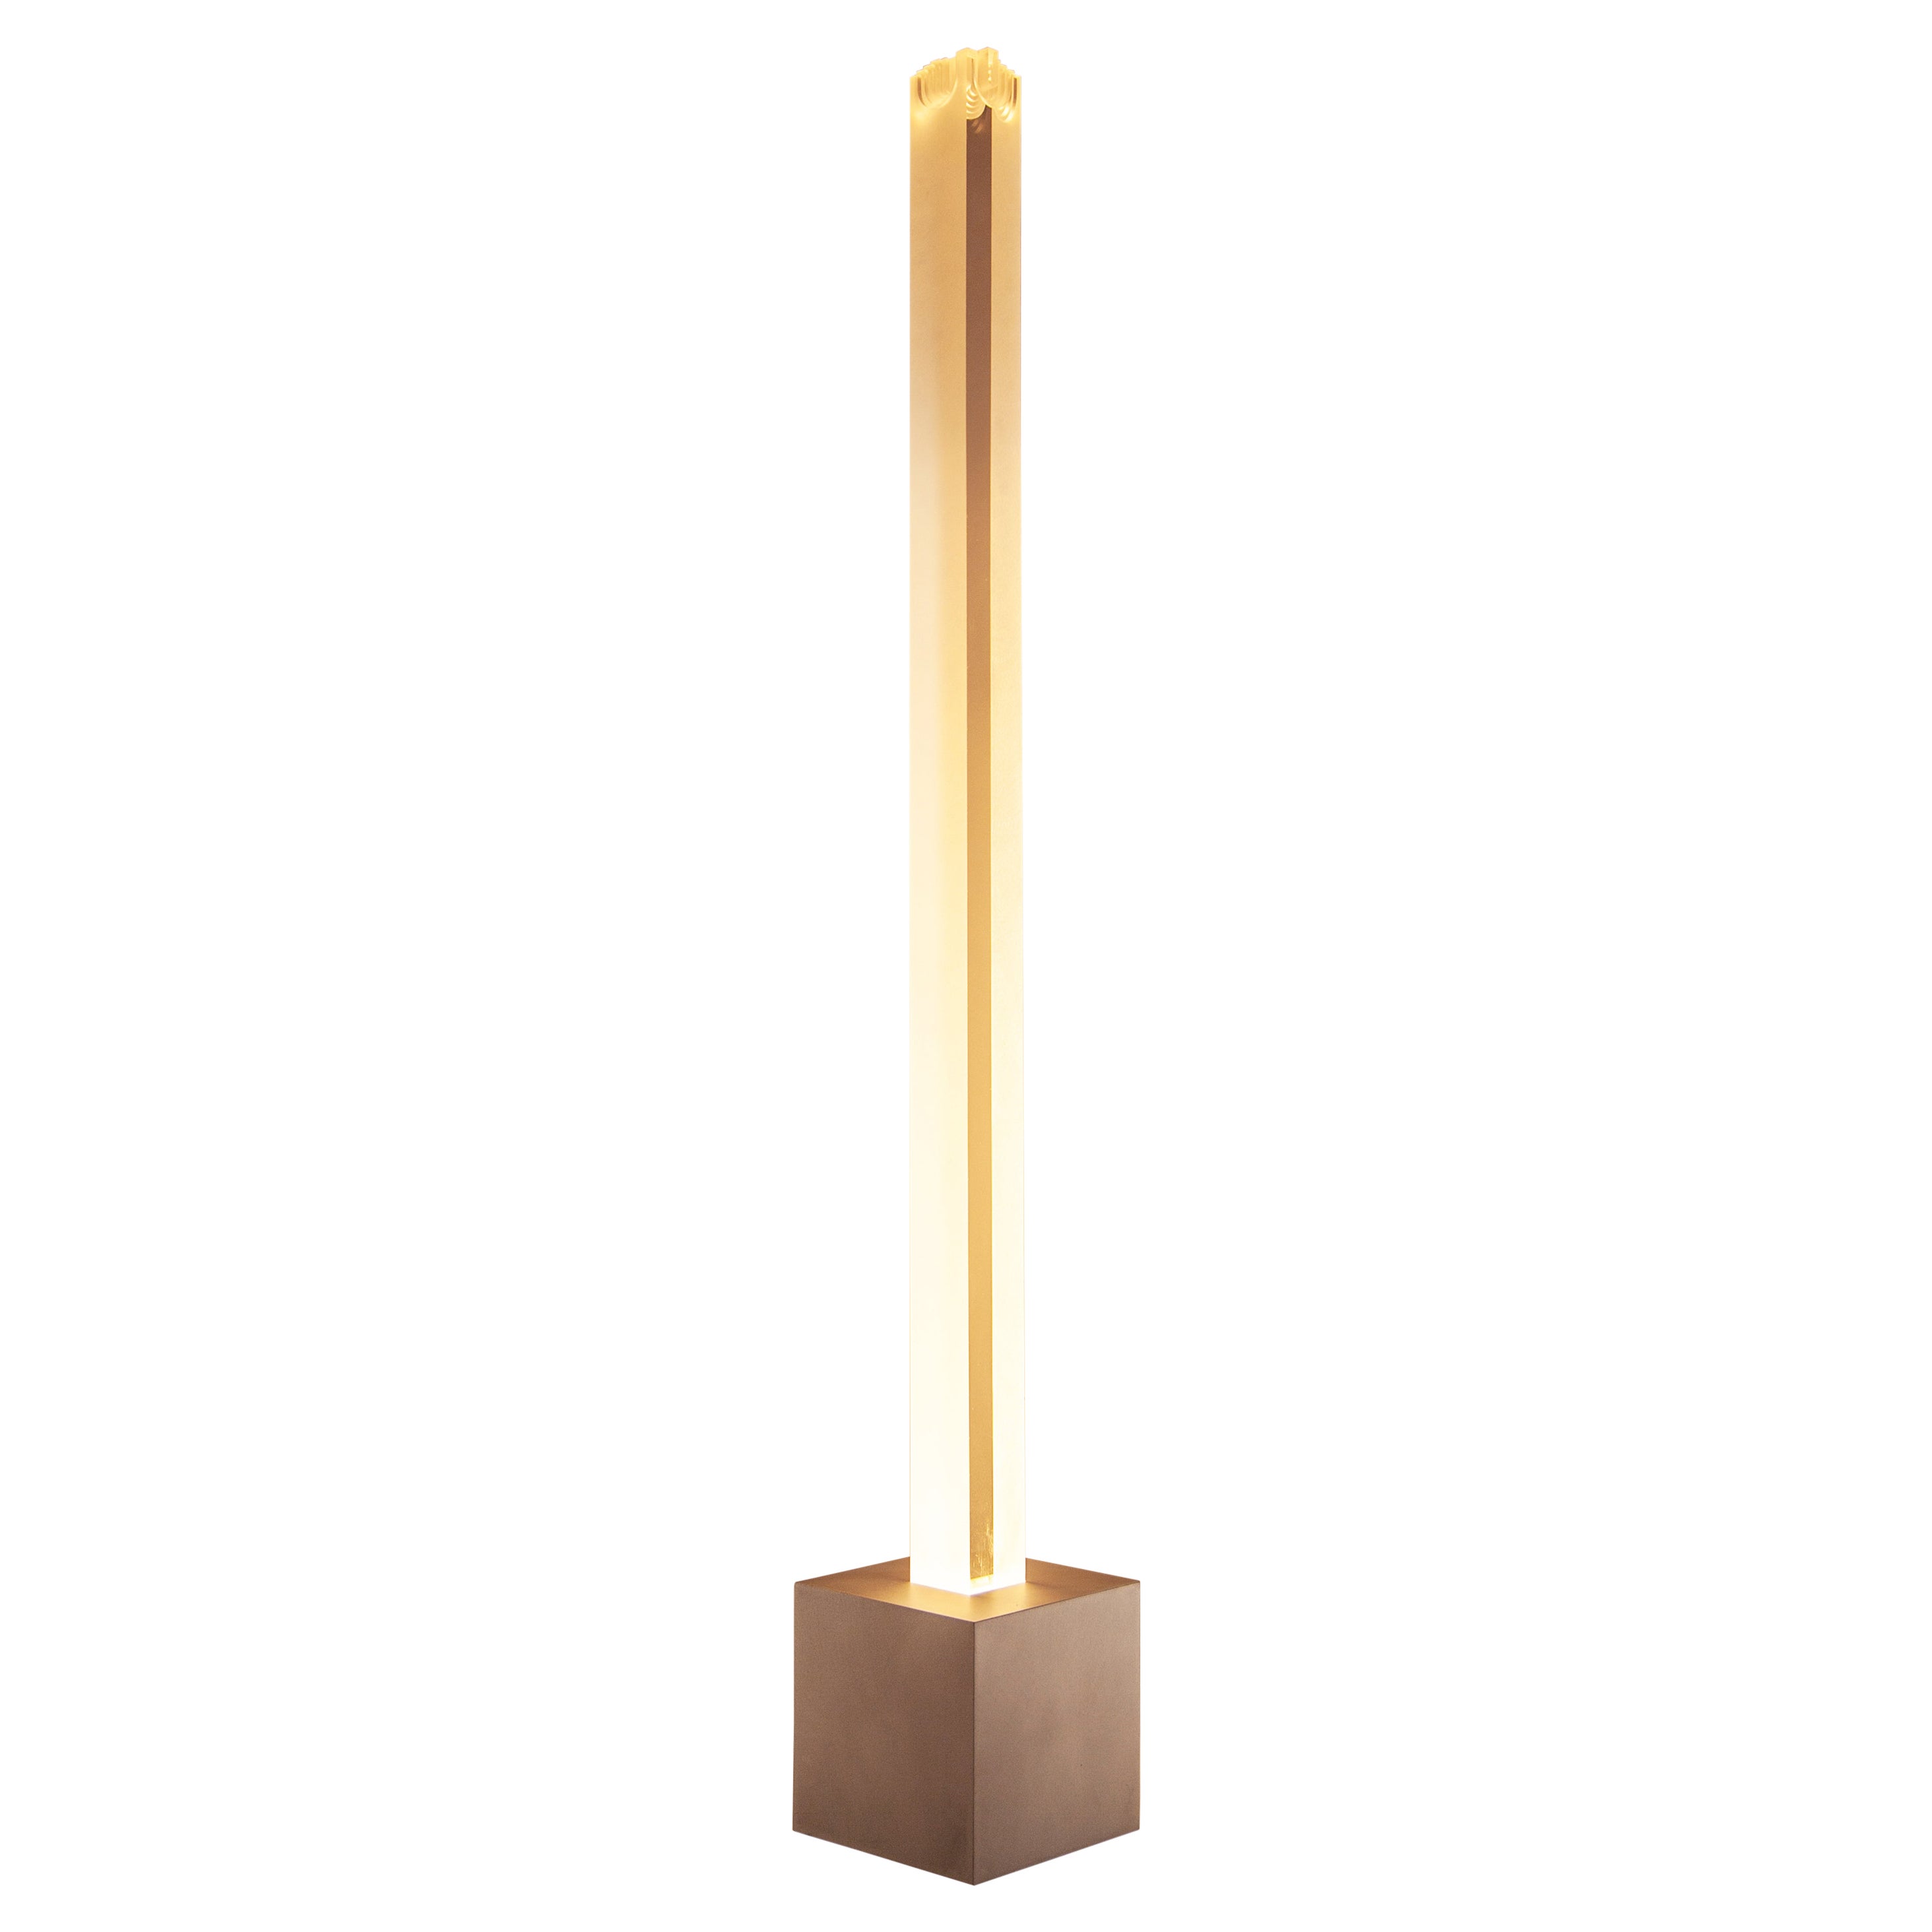 18°40”S Sculptural Lamp by Yonathan Moore, Represented by Tuleste Factory 